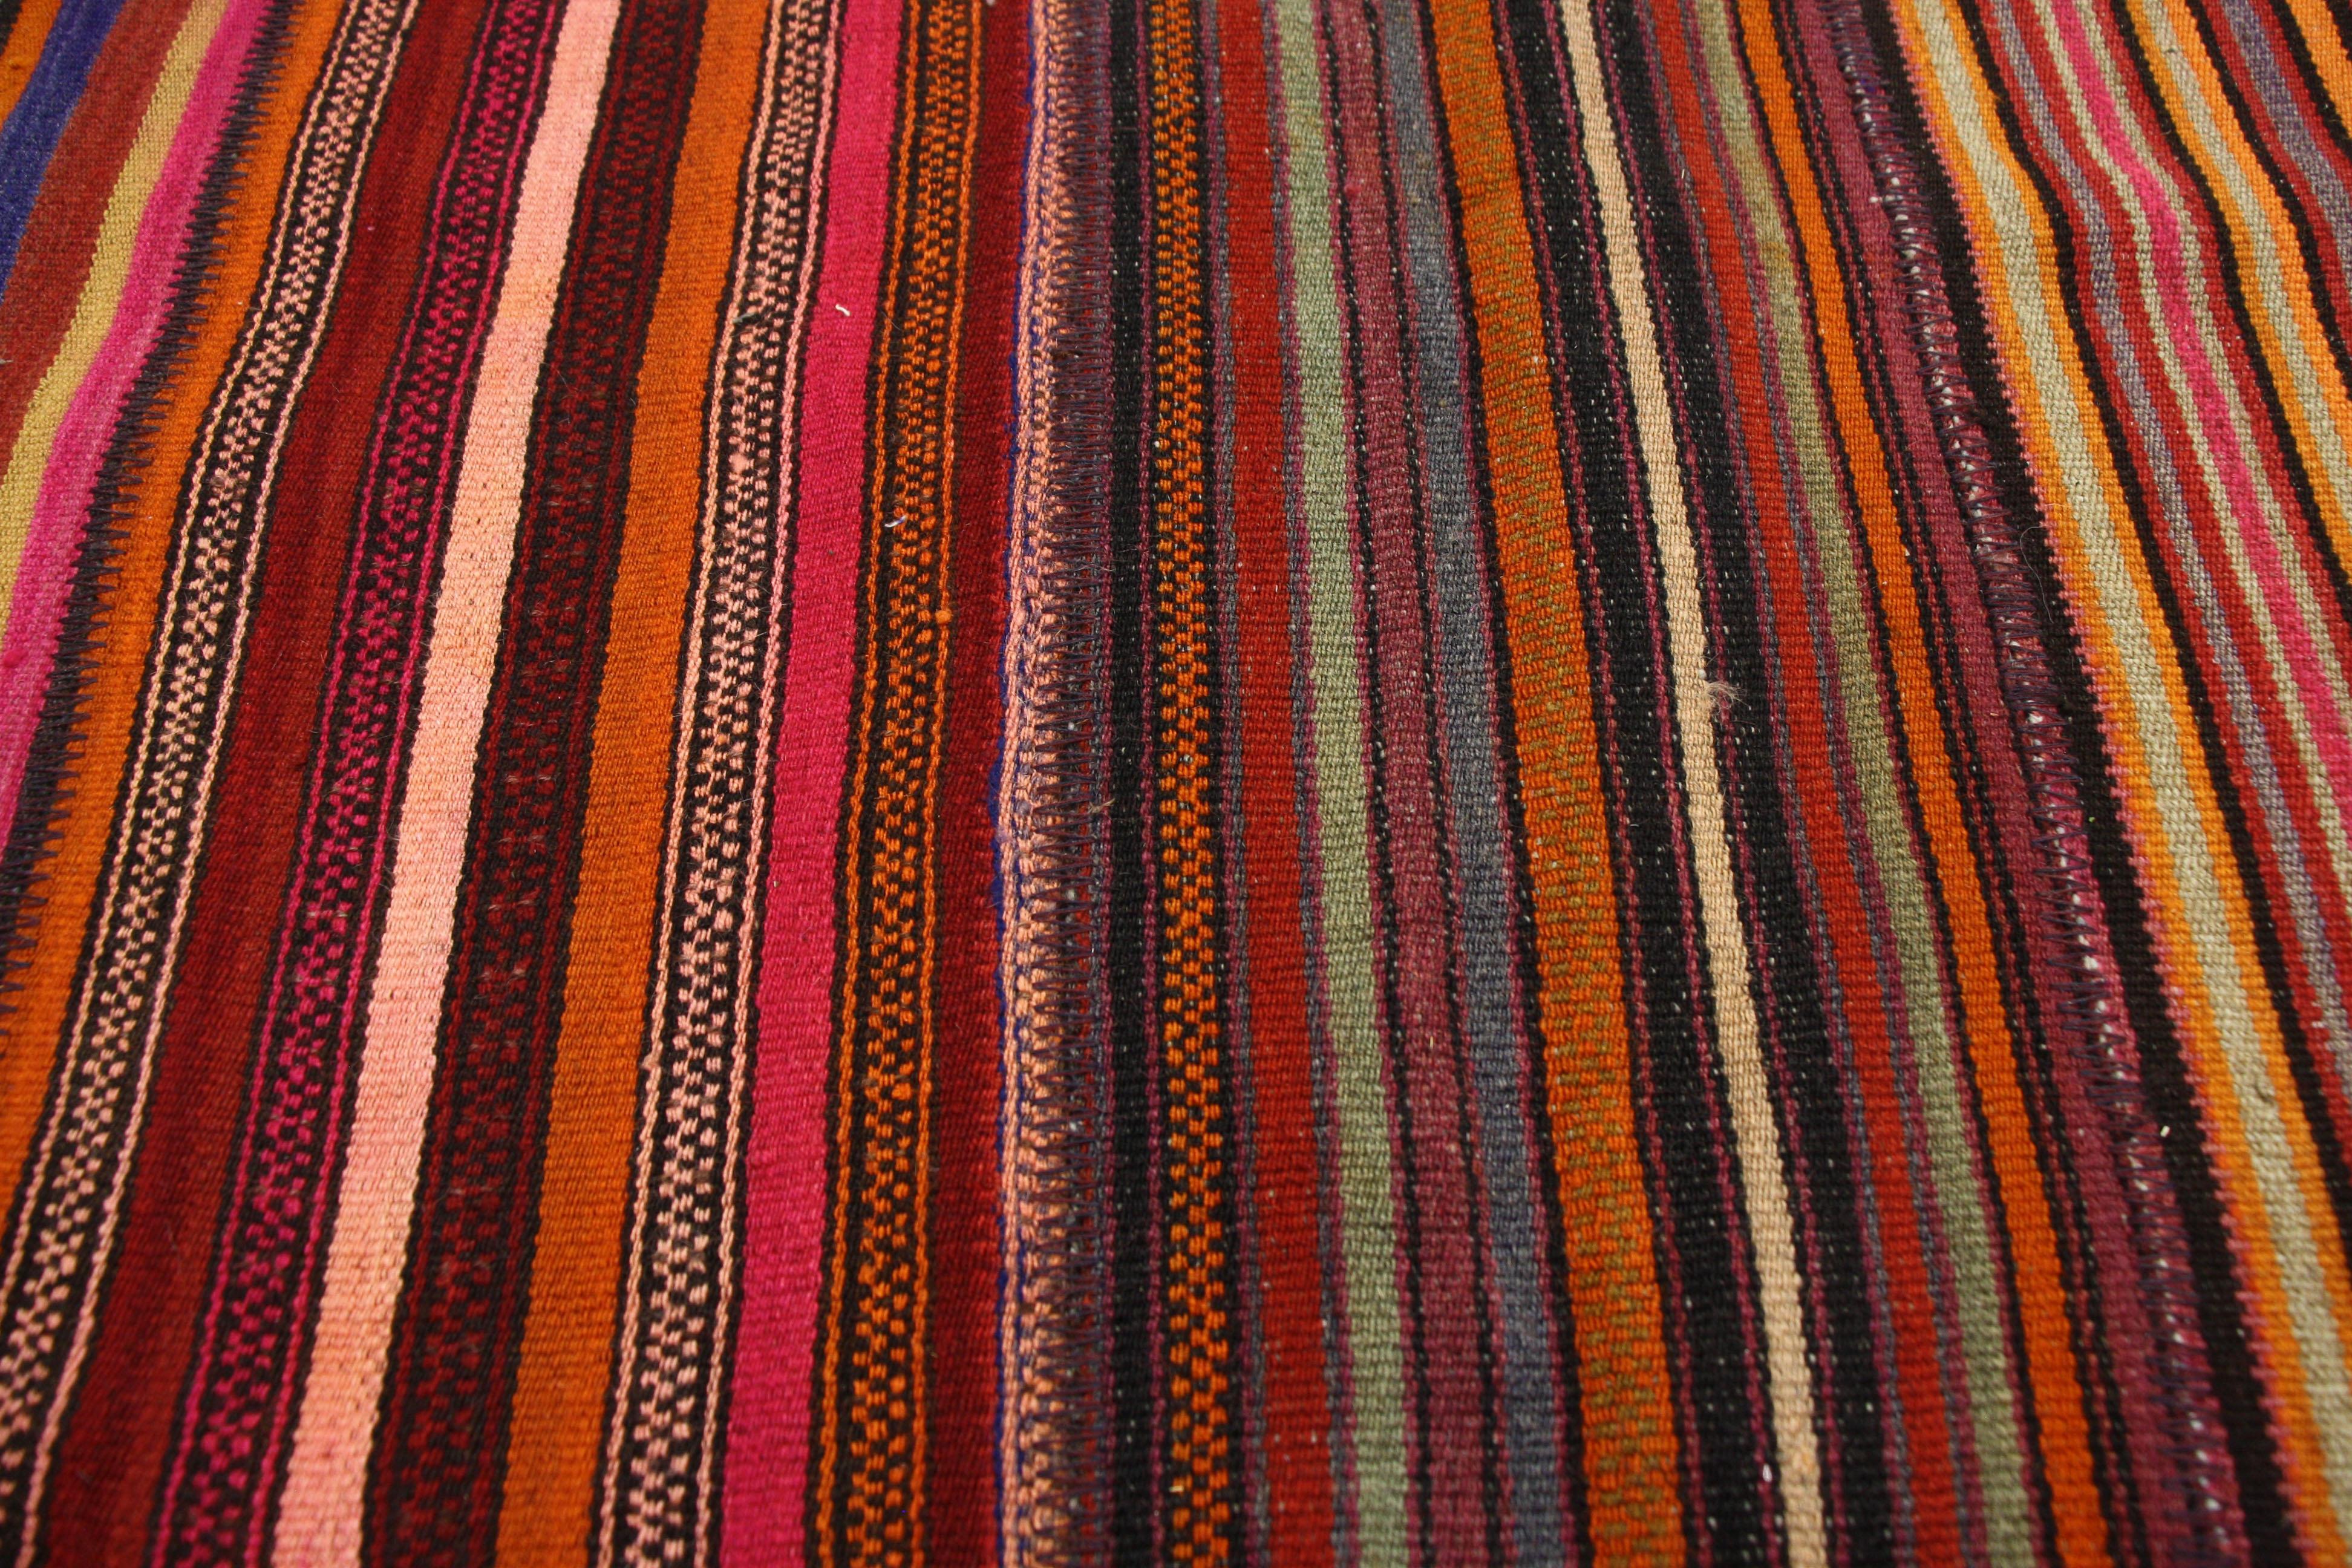 Hand-Woven Distressed Vintage Turkish Striped Kilim Rug with Modern Rustic Cabin Style For Sale